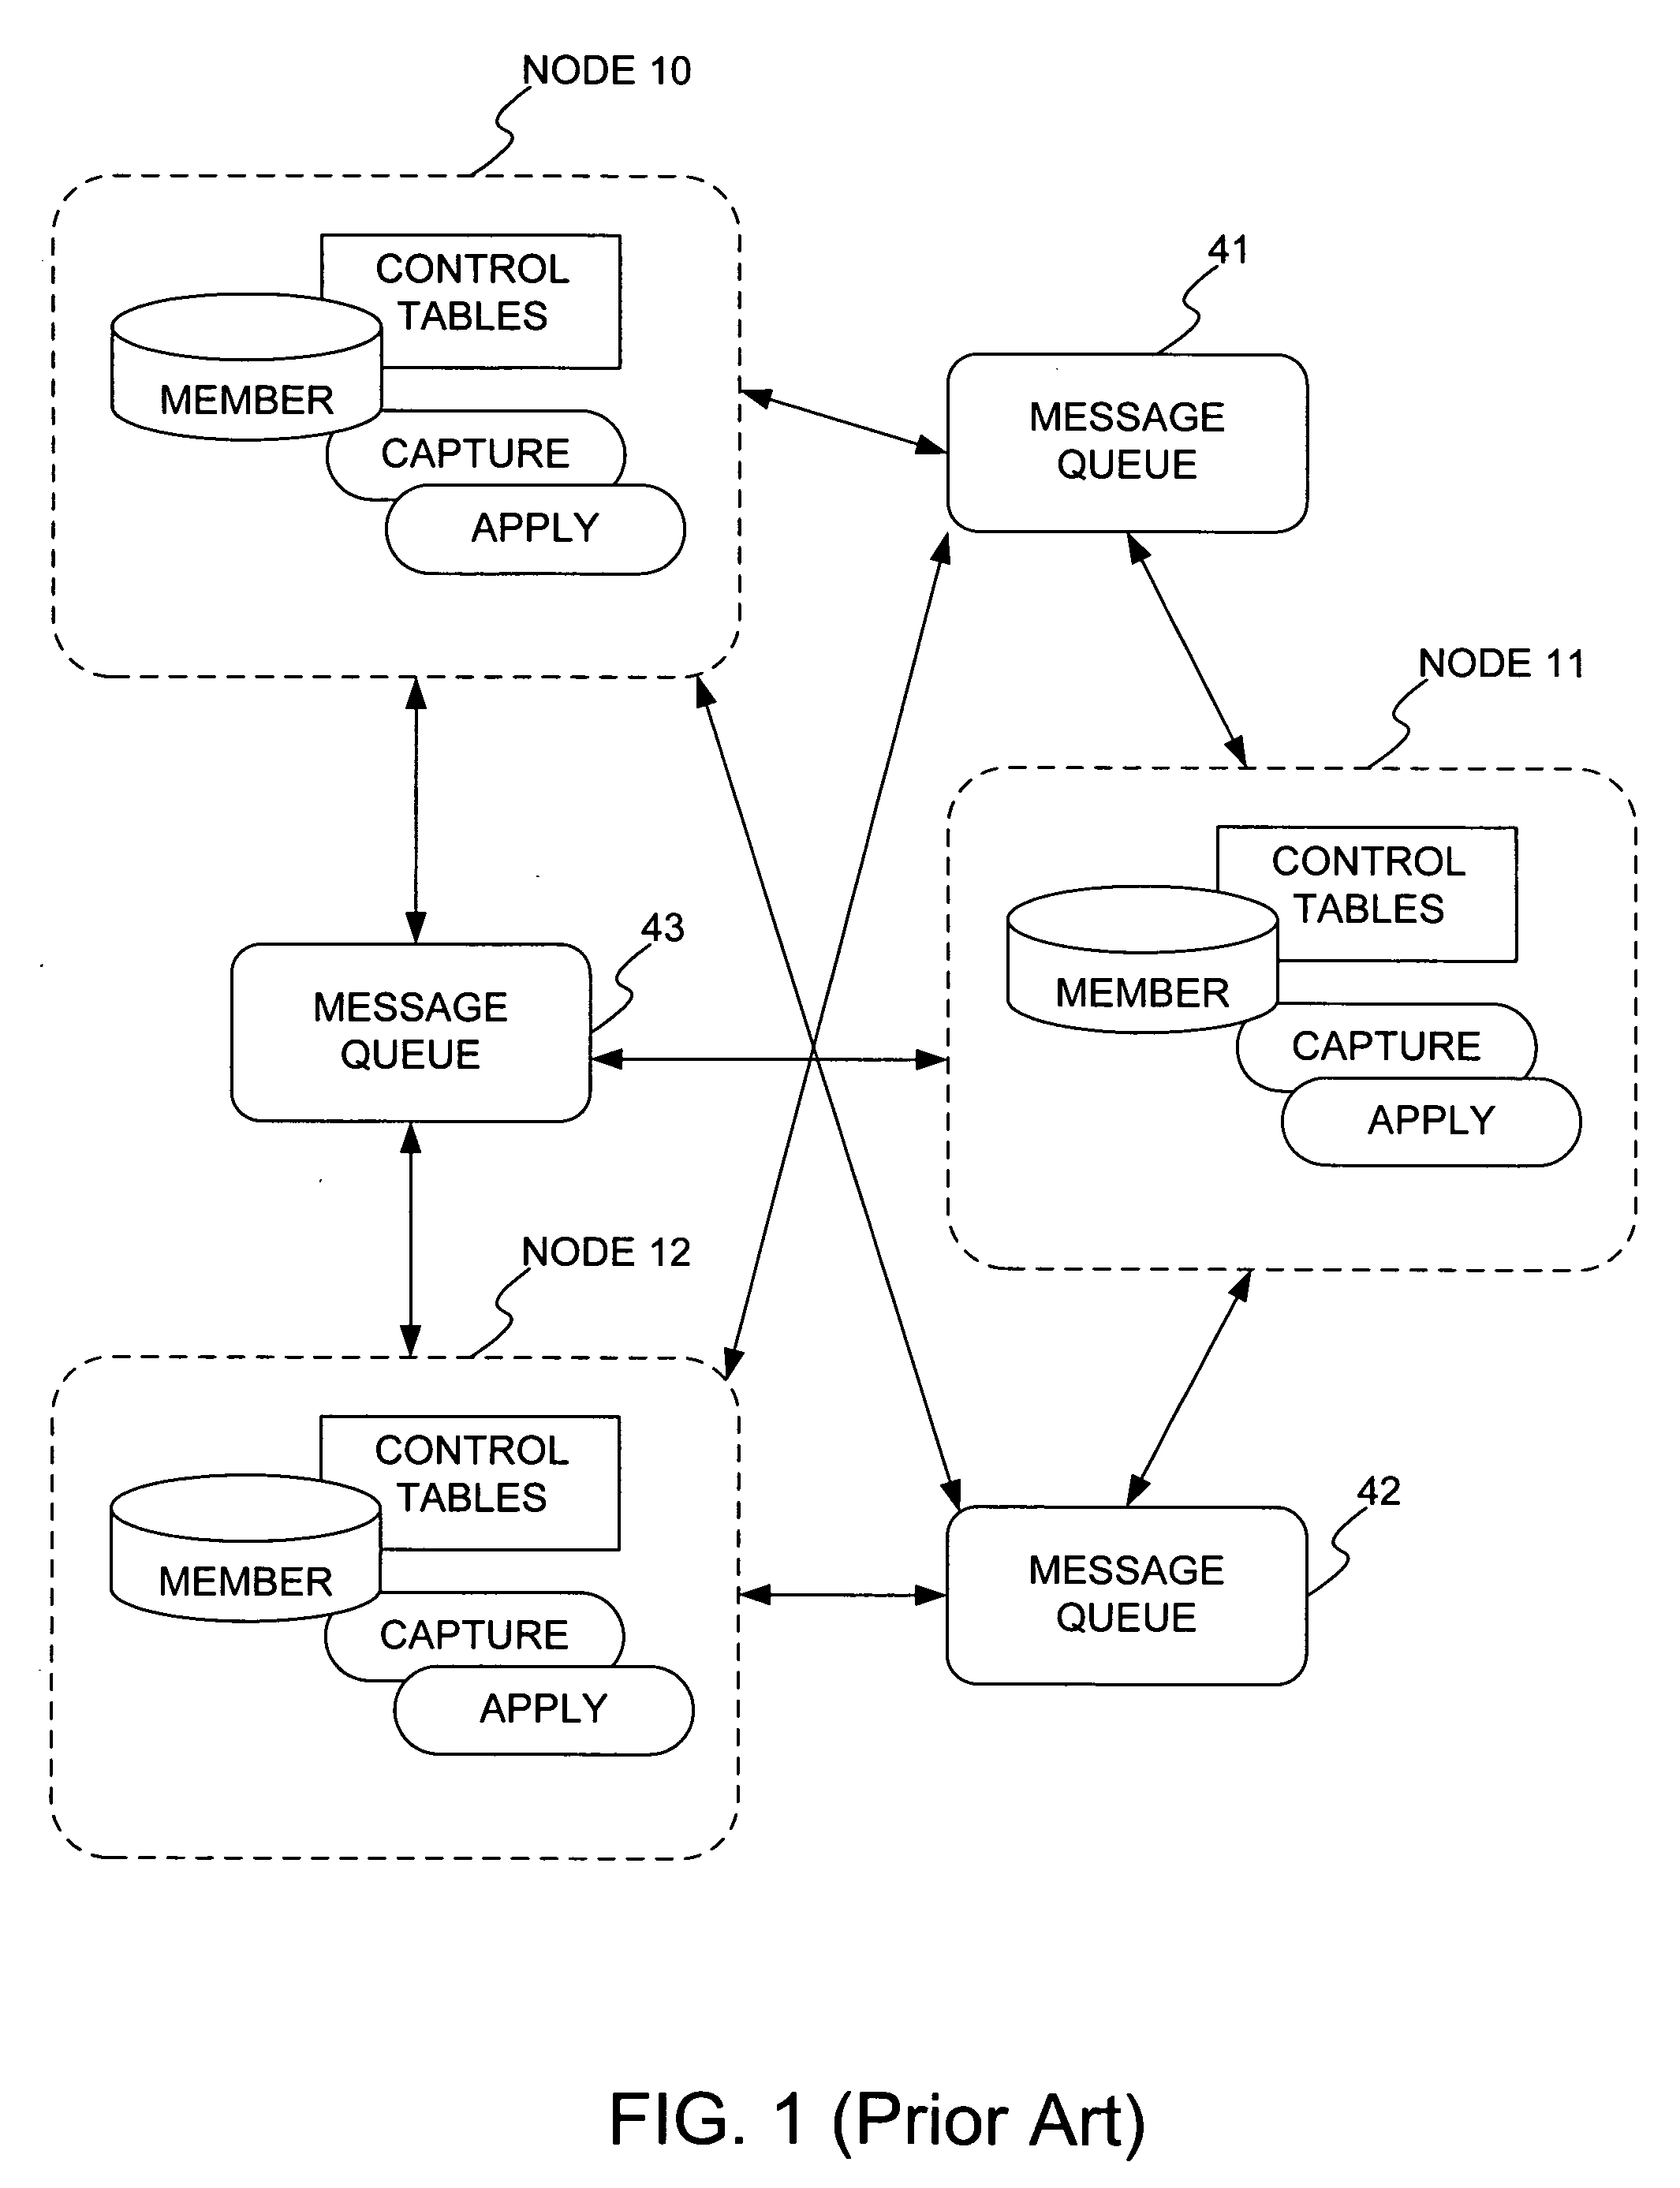 Peer-to-peer replication member initialization and deactivation